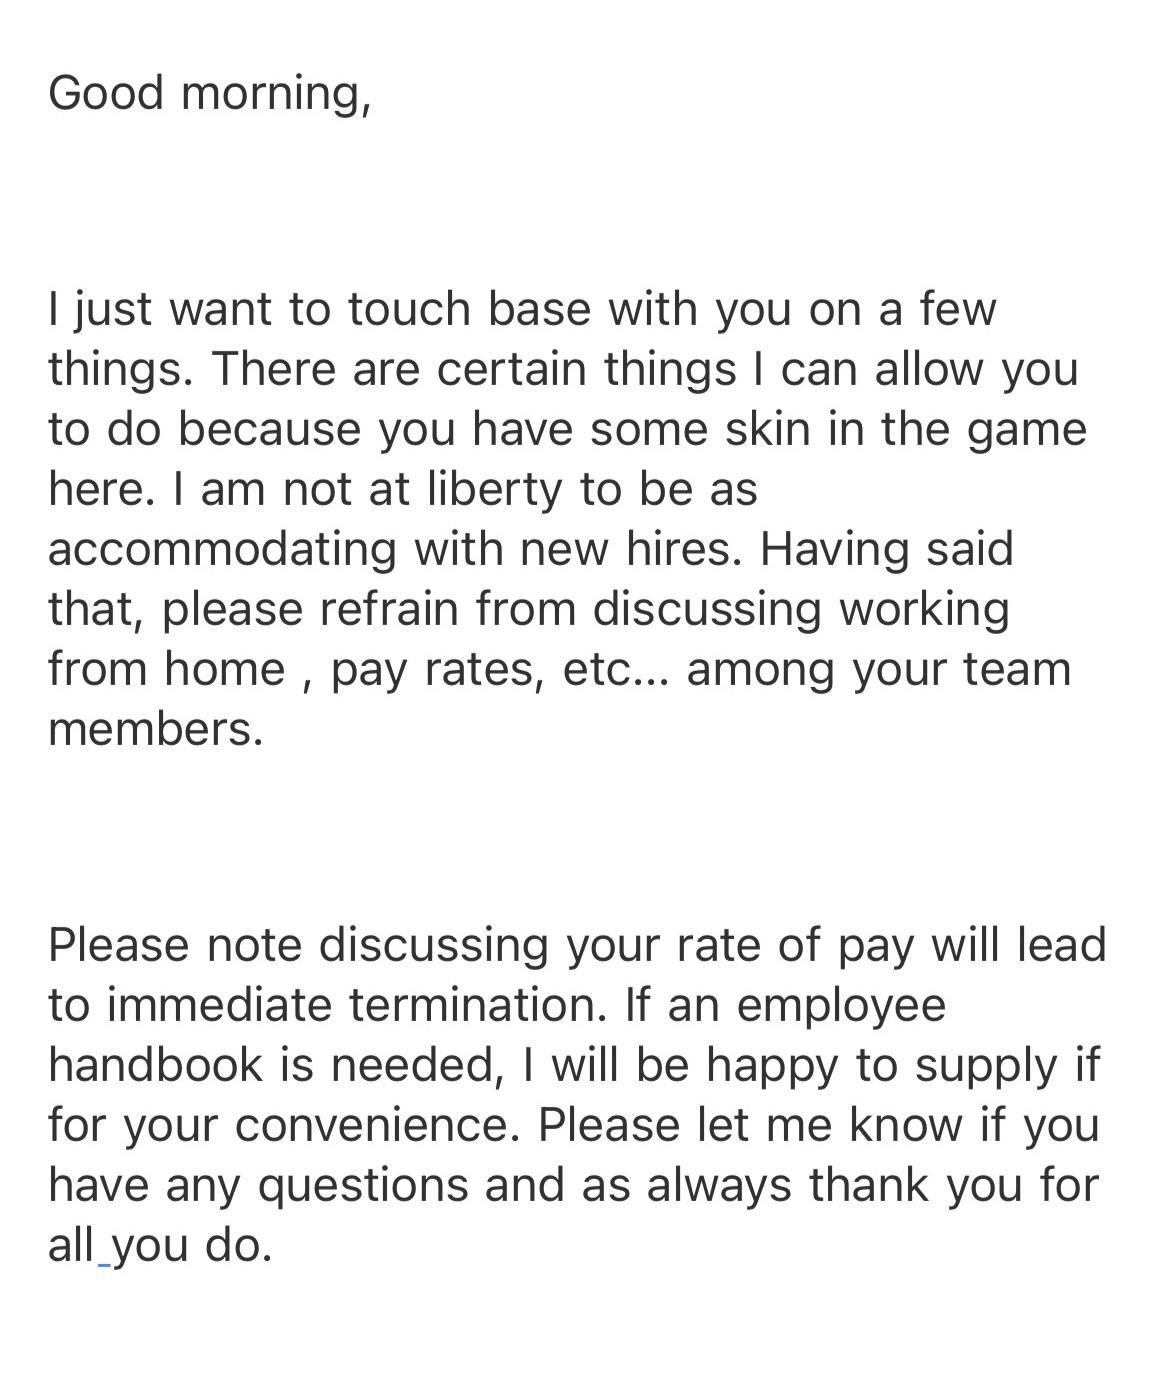 A notice from an employer asking an employee to not talk about pay